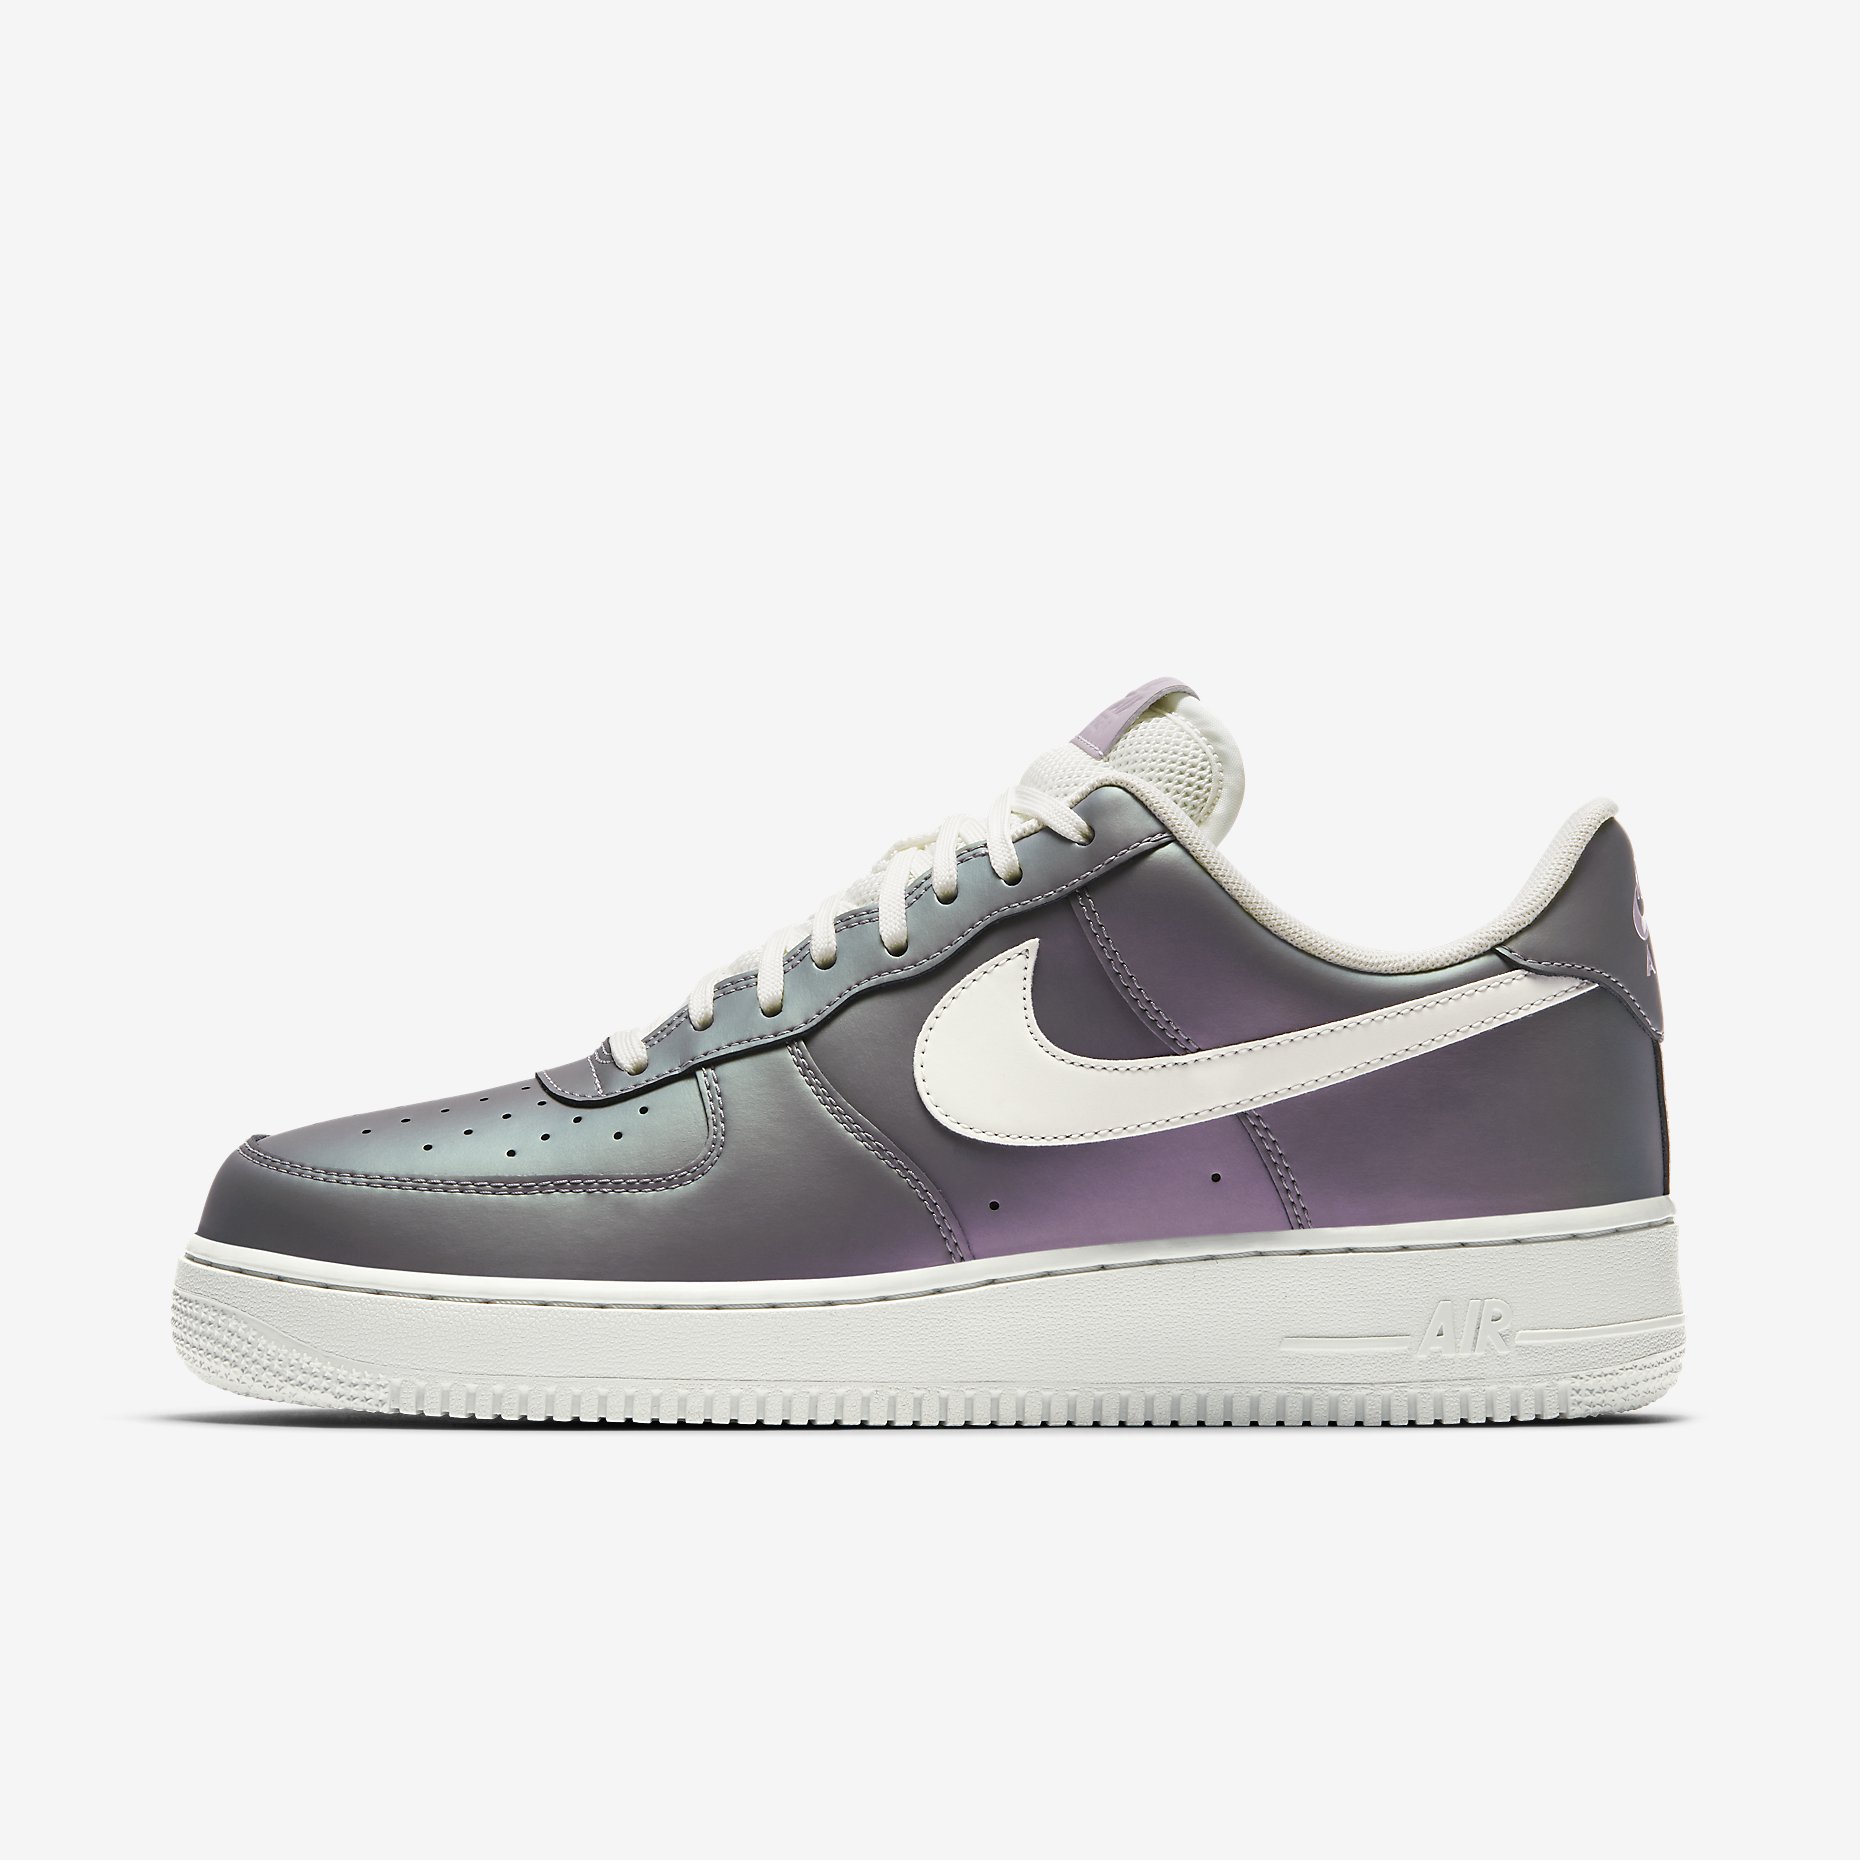 nike-air-force-1-low-07-lv8-iced-lilac-6